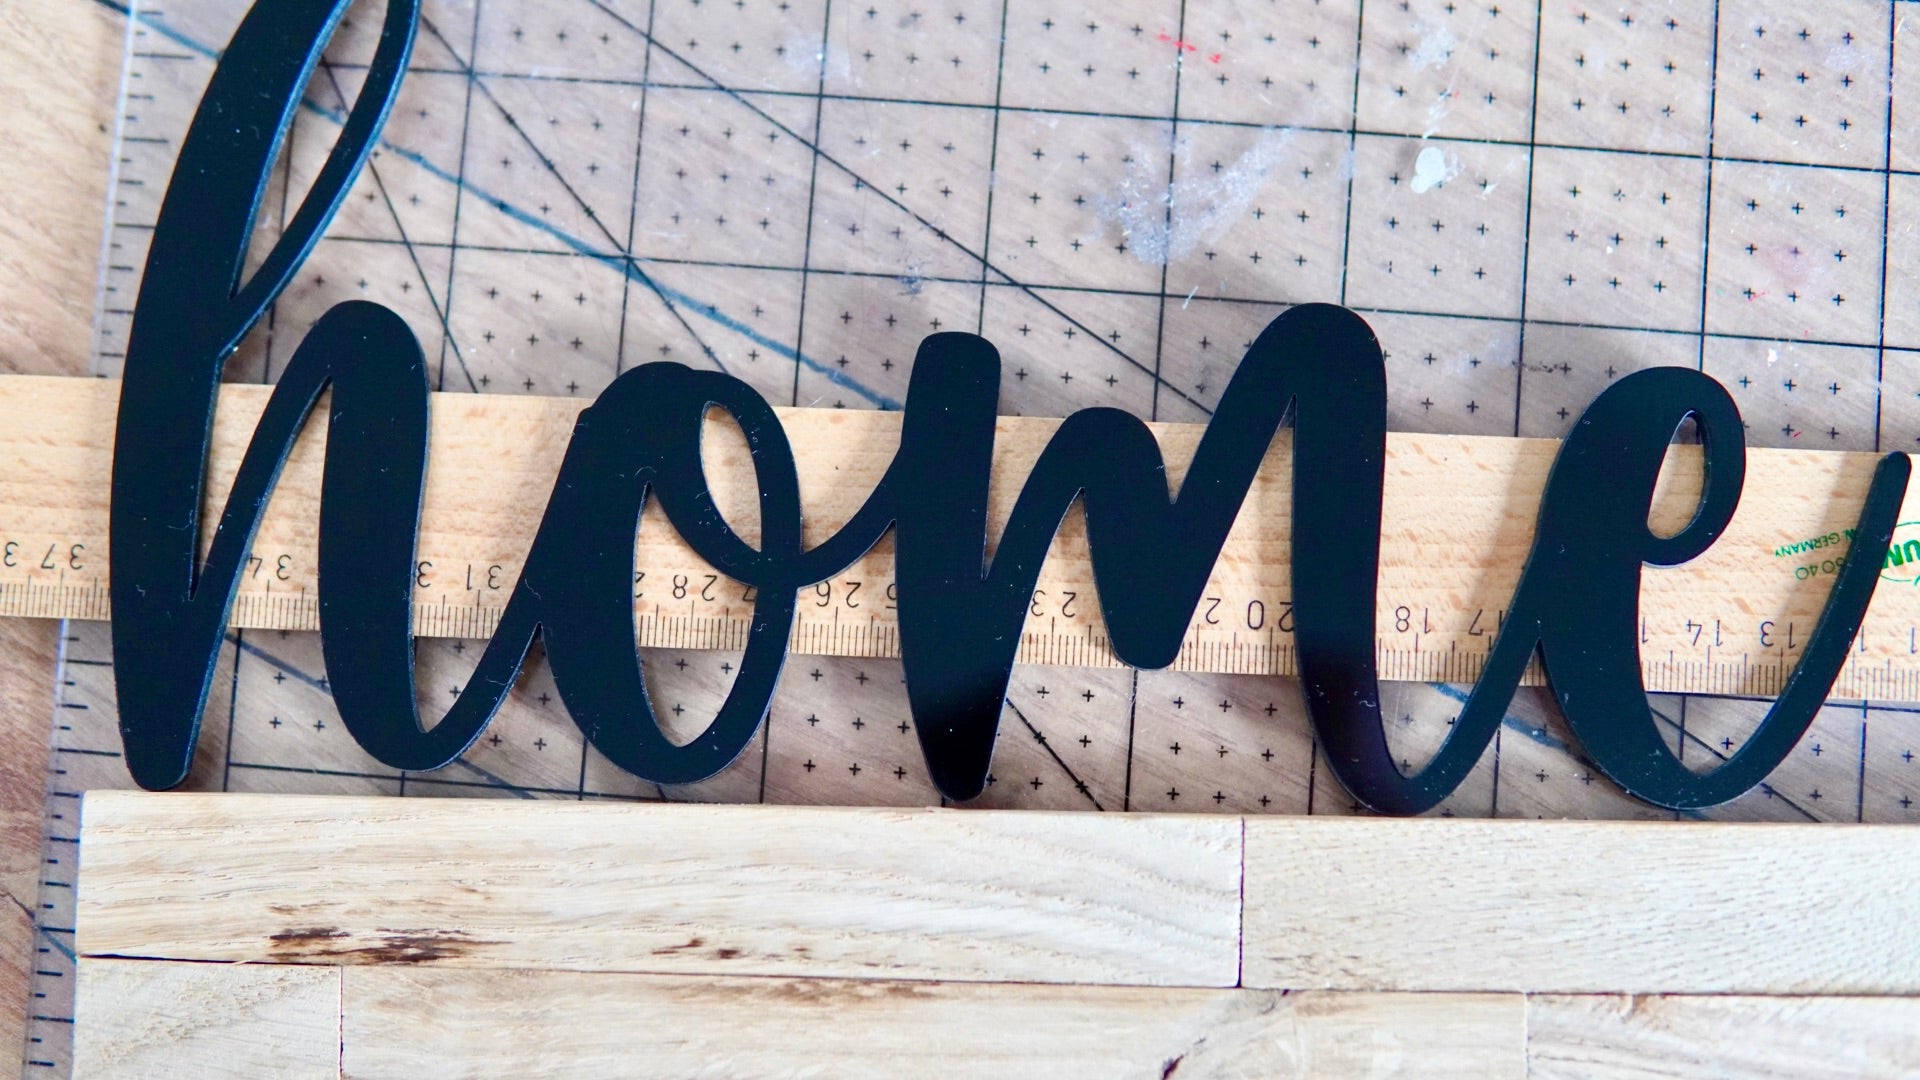 Acrylic lettering